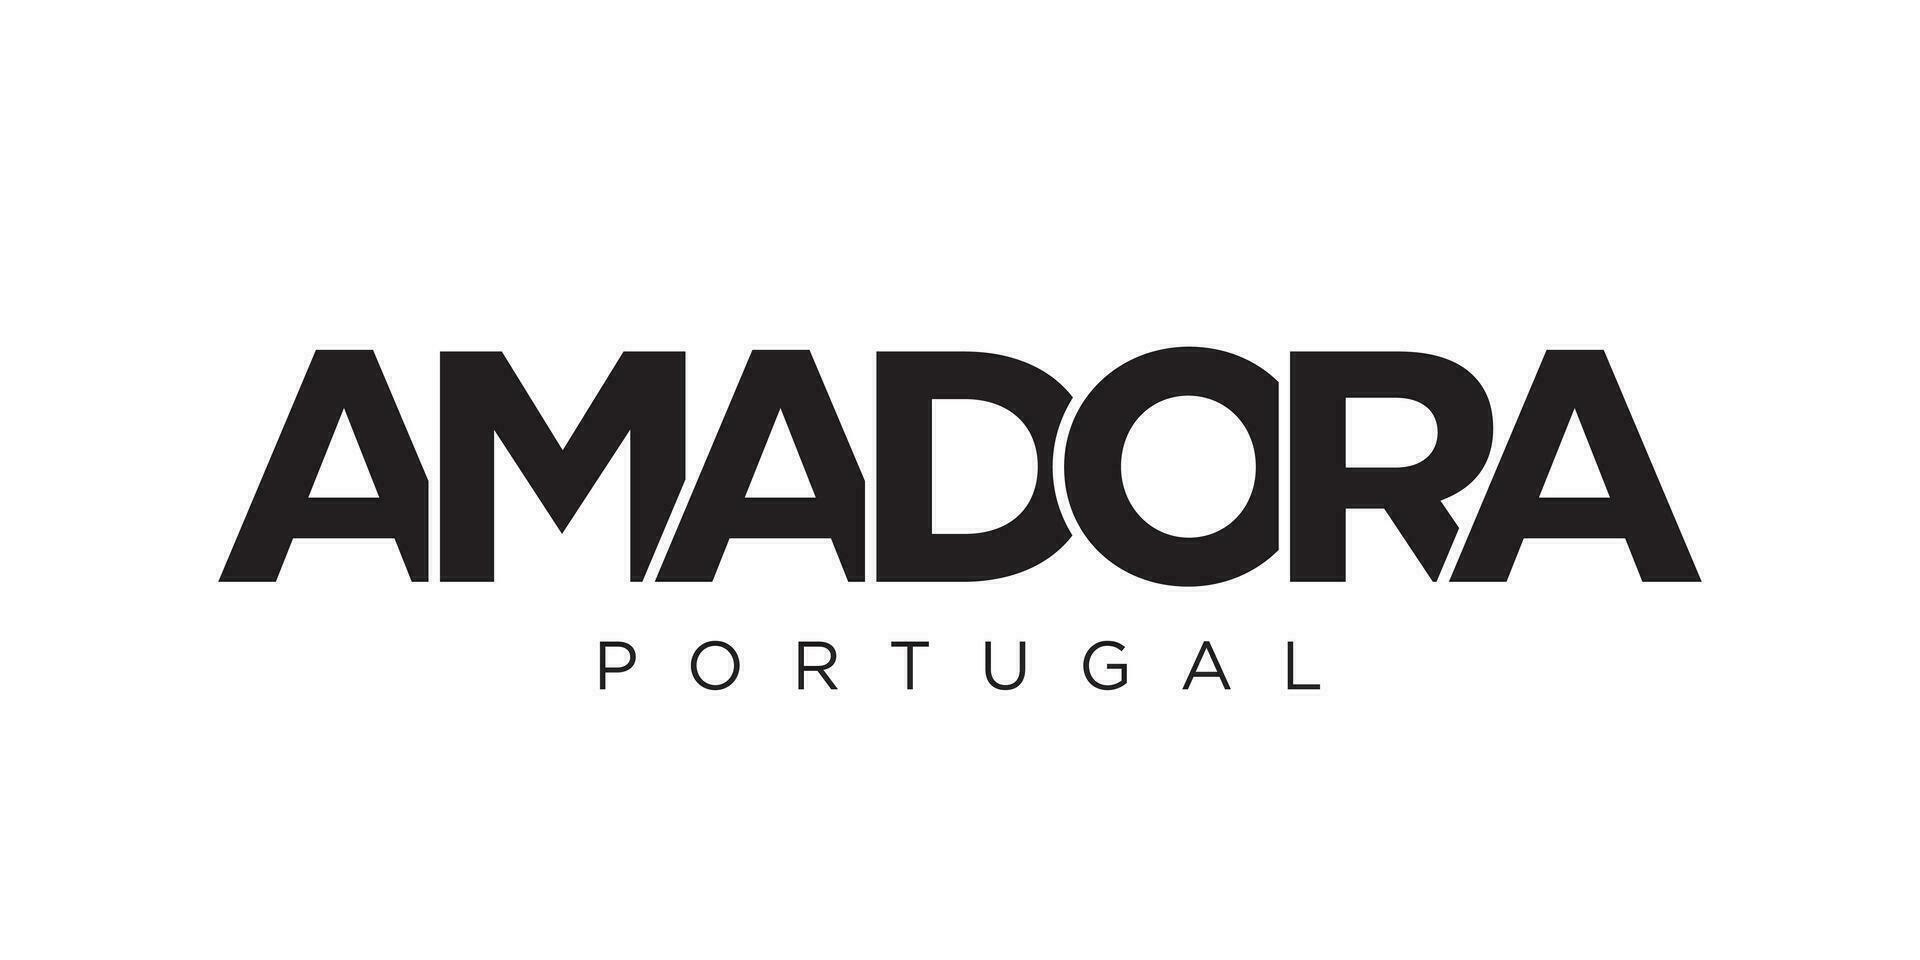 Amadora in the Portugal emblem. The design features a geometric style, vector illustration with bold typography in a modern font. The graphic slogan lettering.